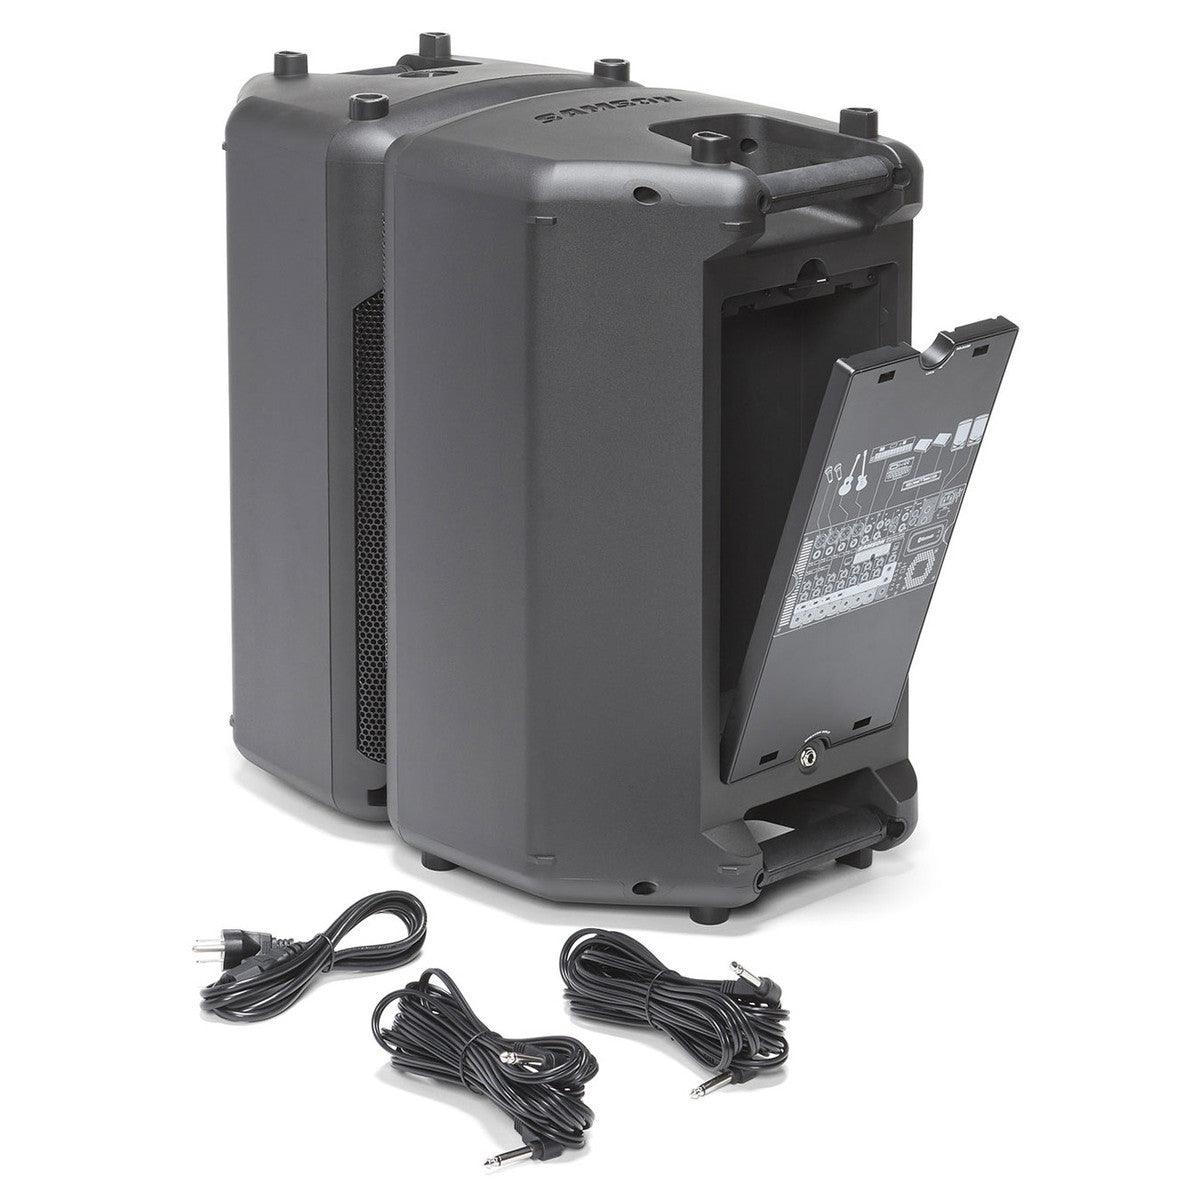 Samson Expedition XP1000 Portable PA system